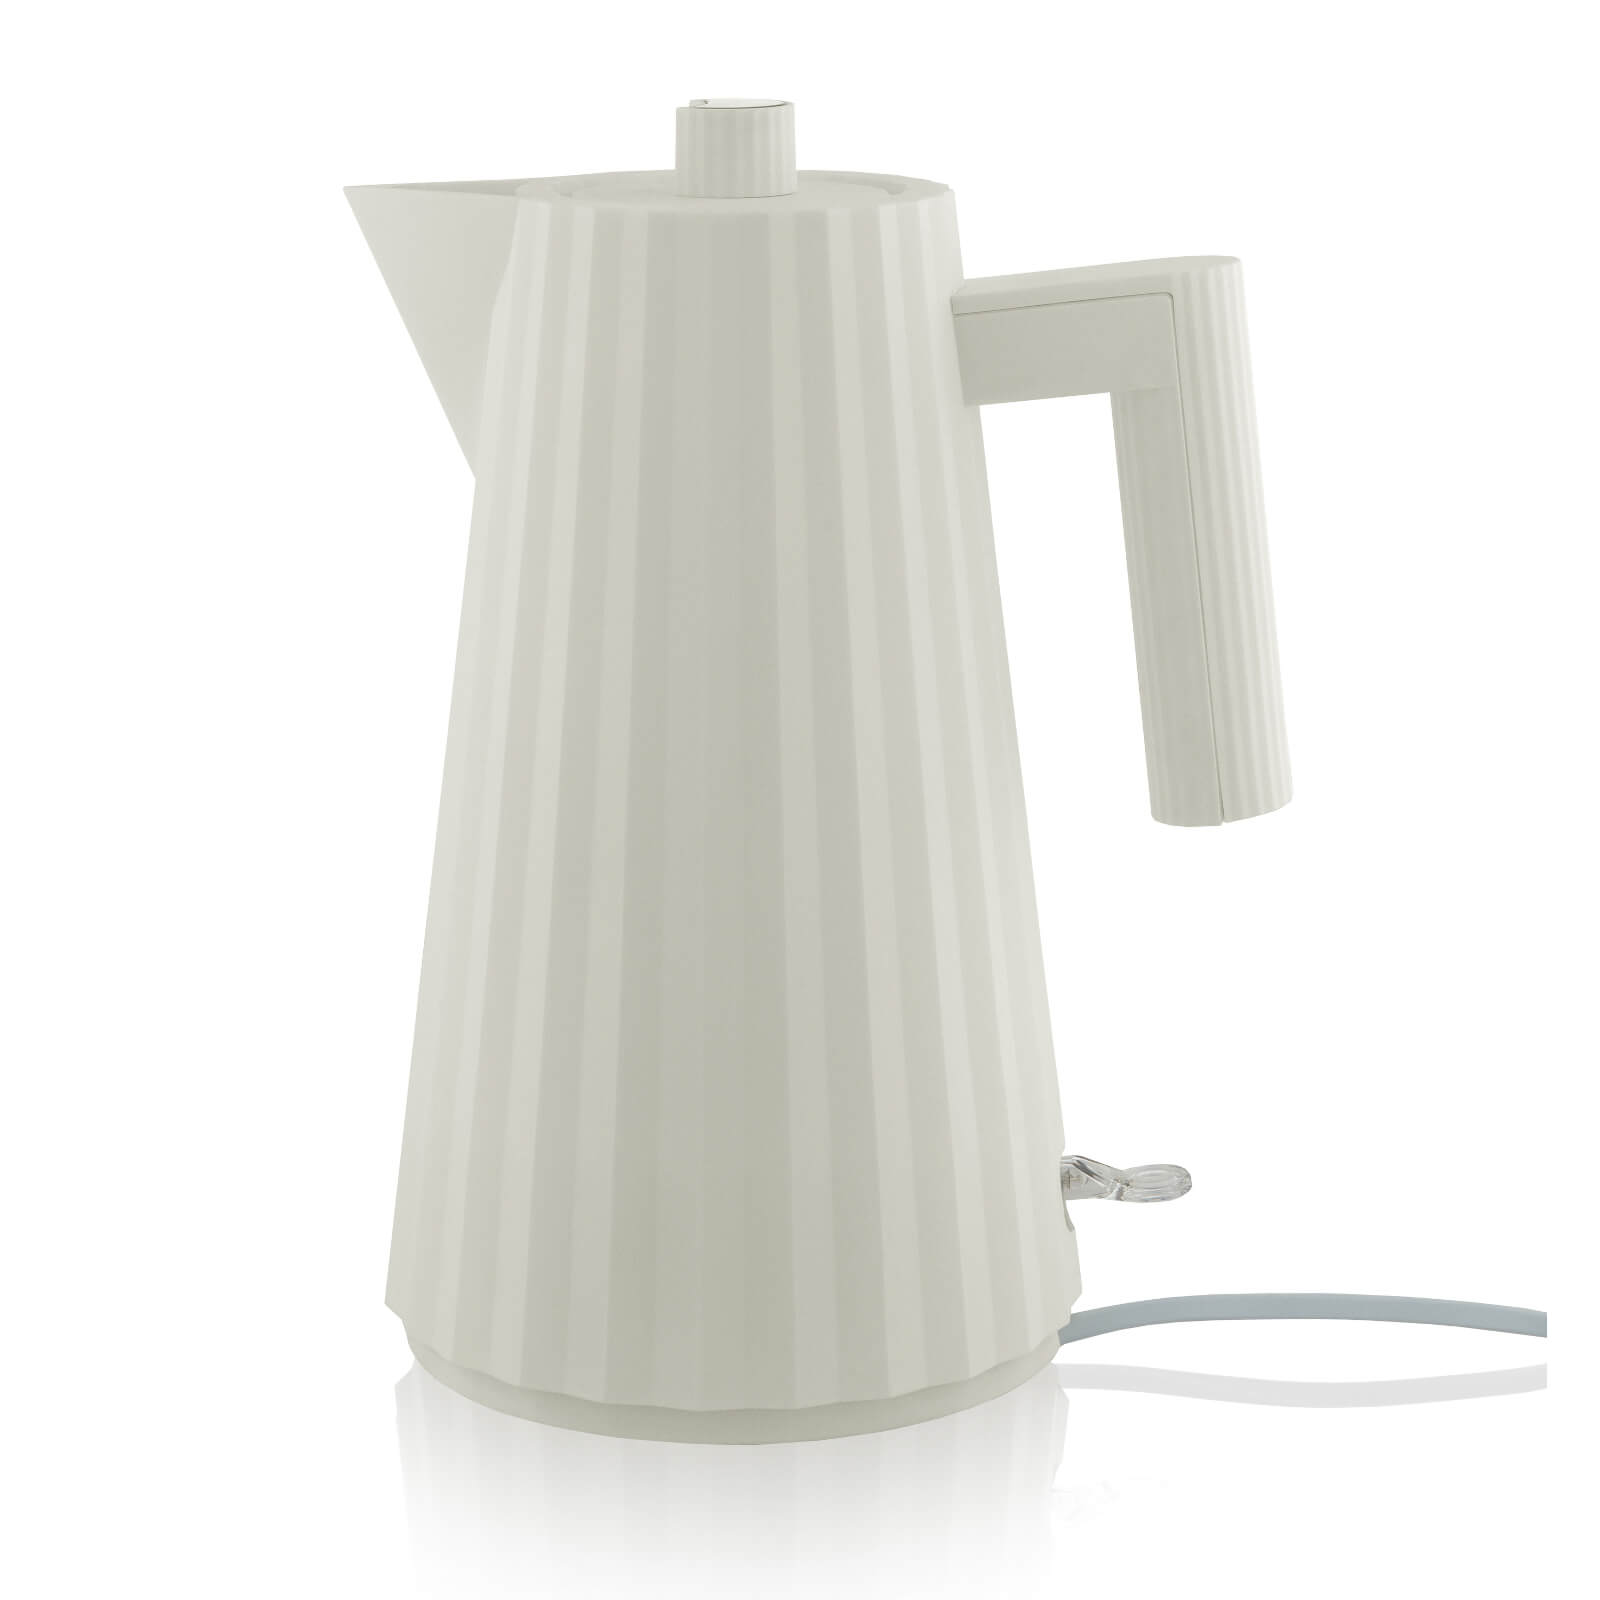 Image of Alessi Electric Kettle - Plisse White - 1.7L